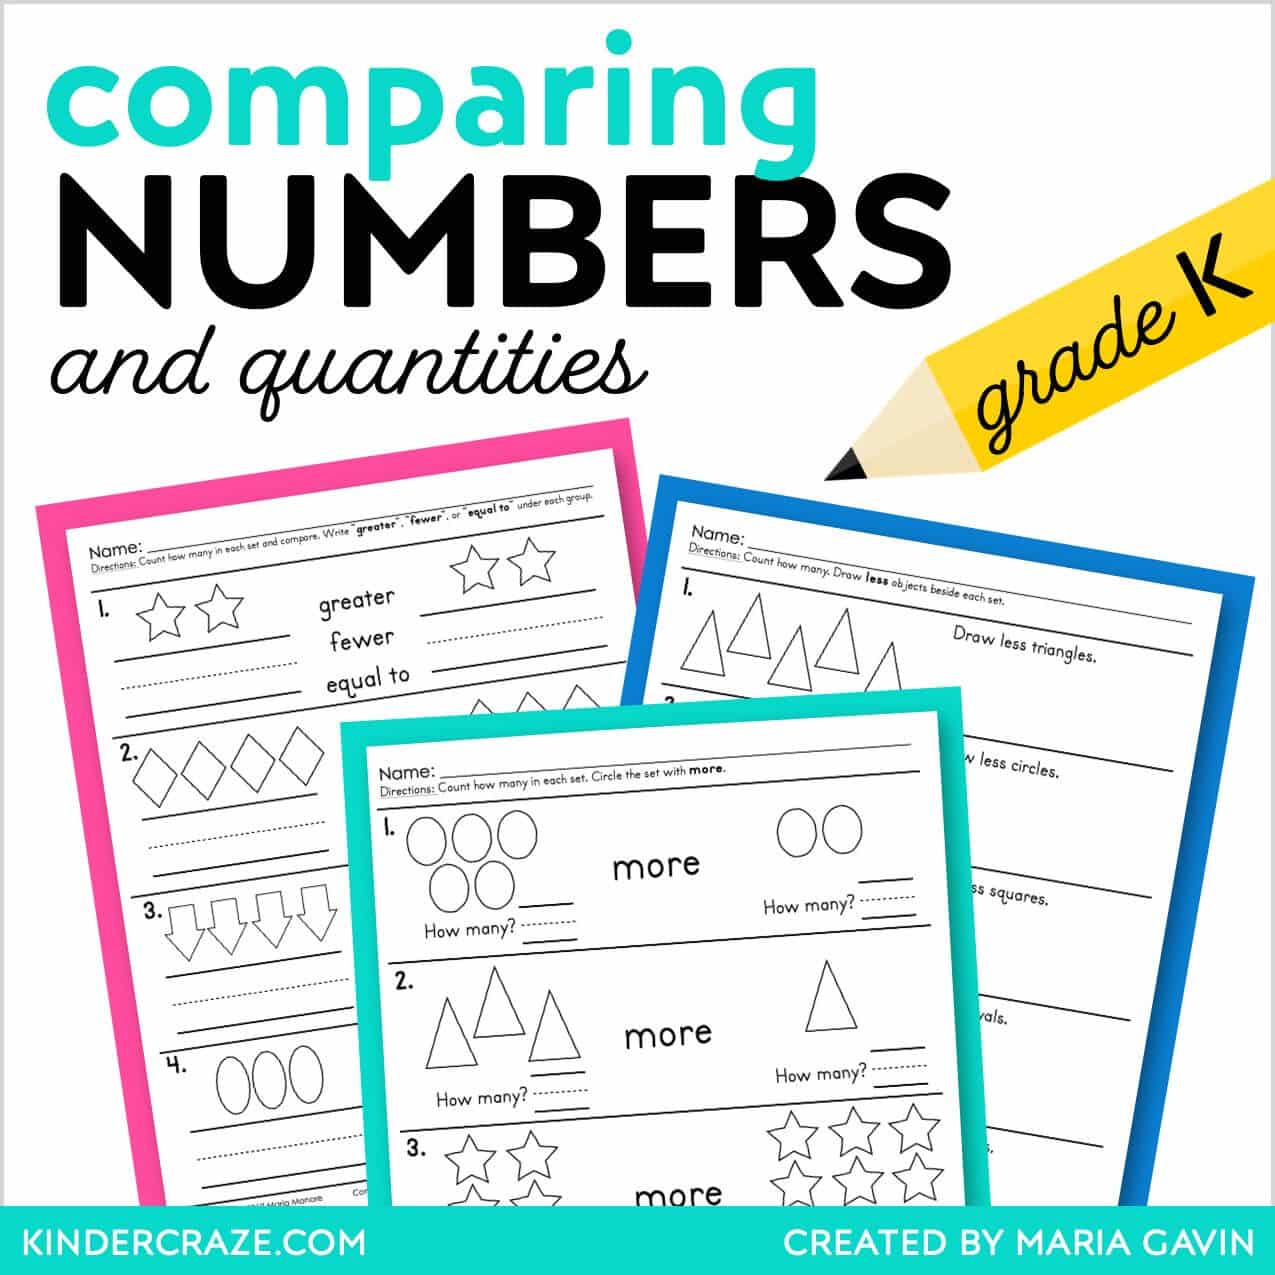 comparing-numbers-worksheets-more-less-same-as-greater-fewer-equal-kinder-craze